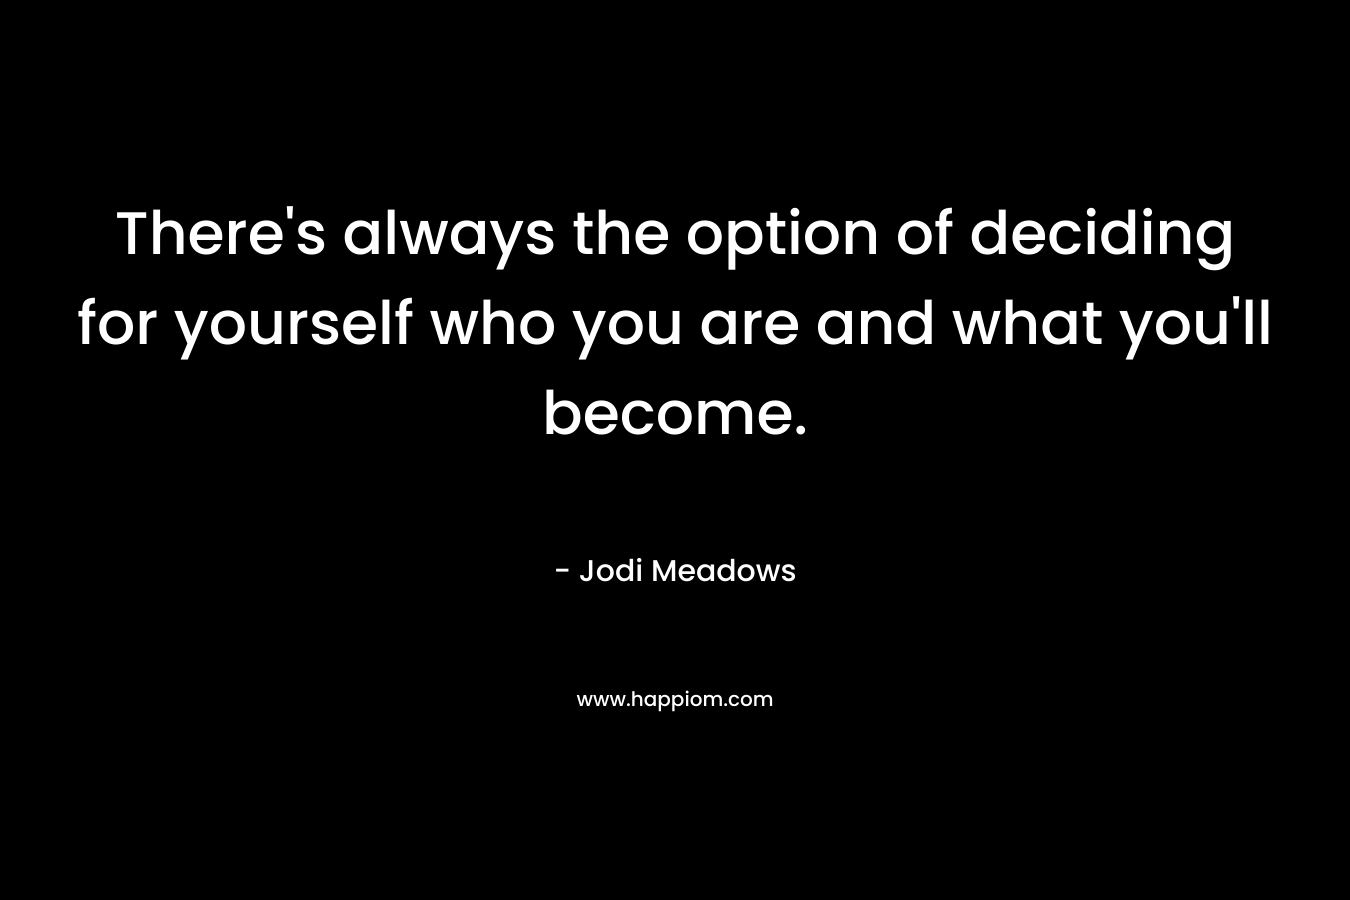 There's always the option of deciding for yourself who you are and what you'll become.